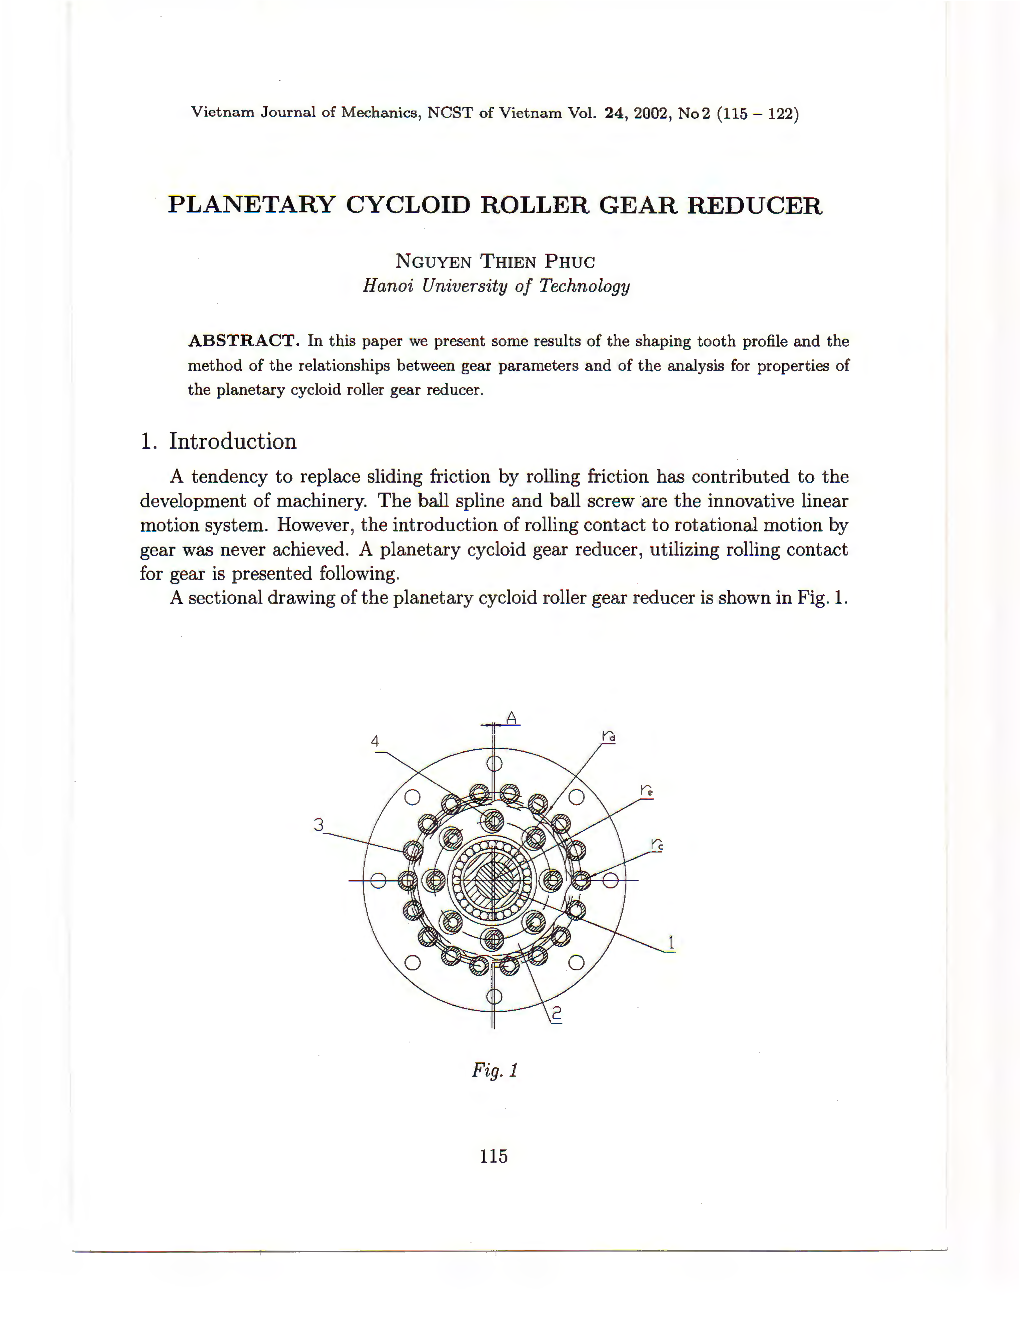 Planetary Cycloid Roller Gear Reducer